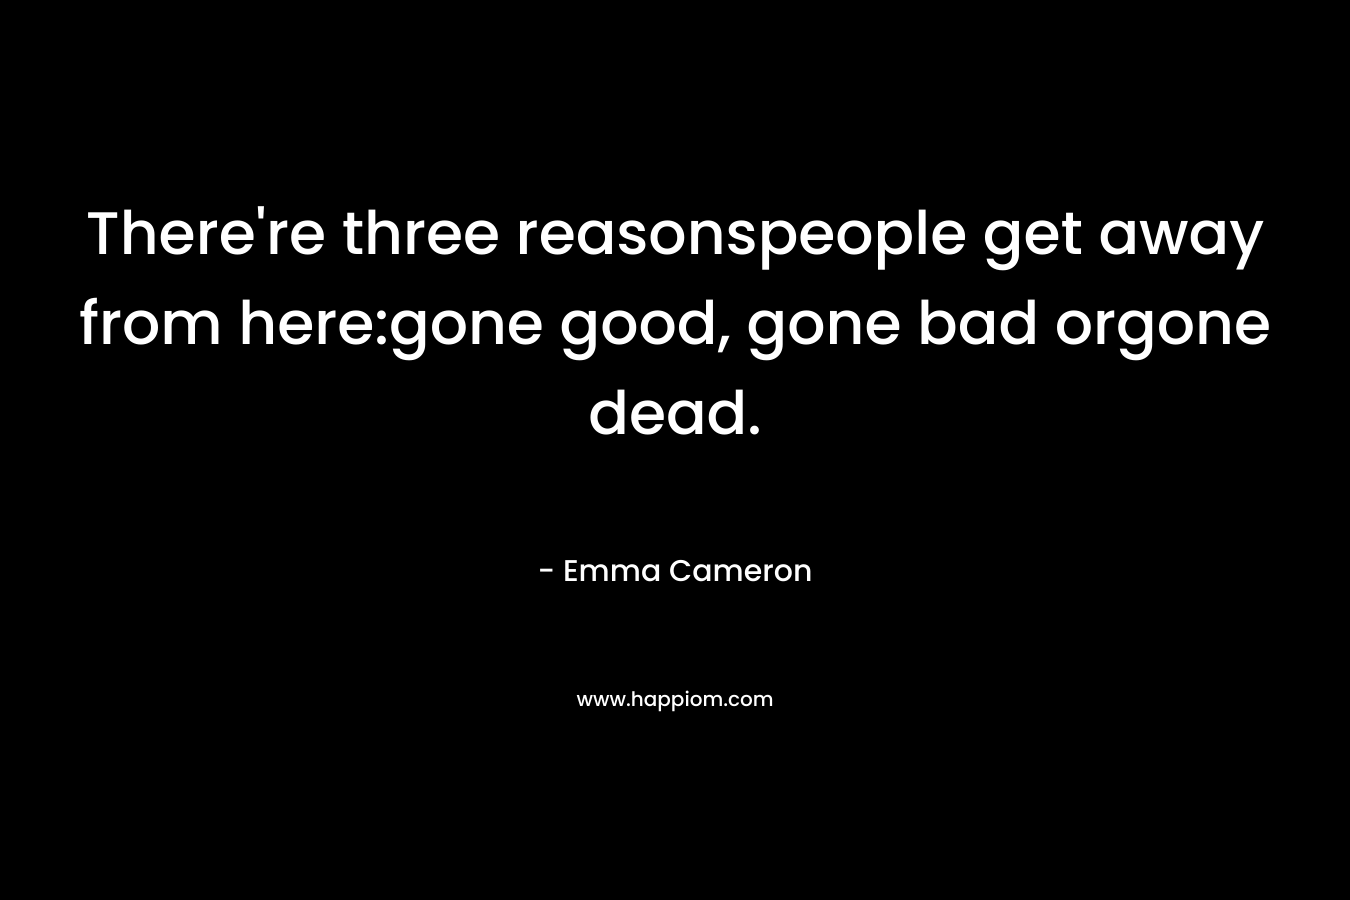 There're three reasonspeople get away from here:gone good, gone bad orgone dead.